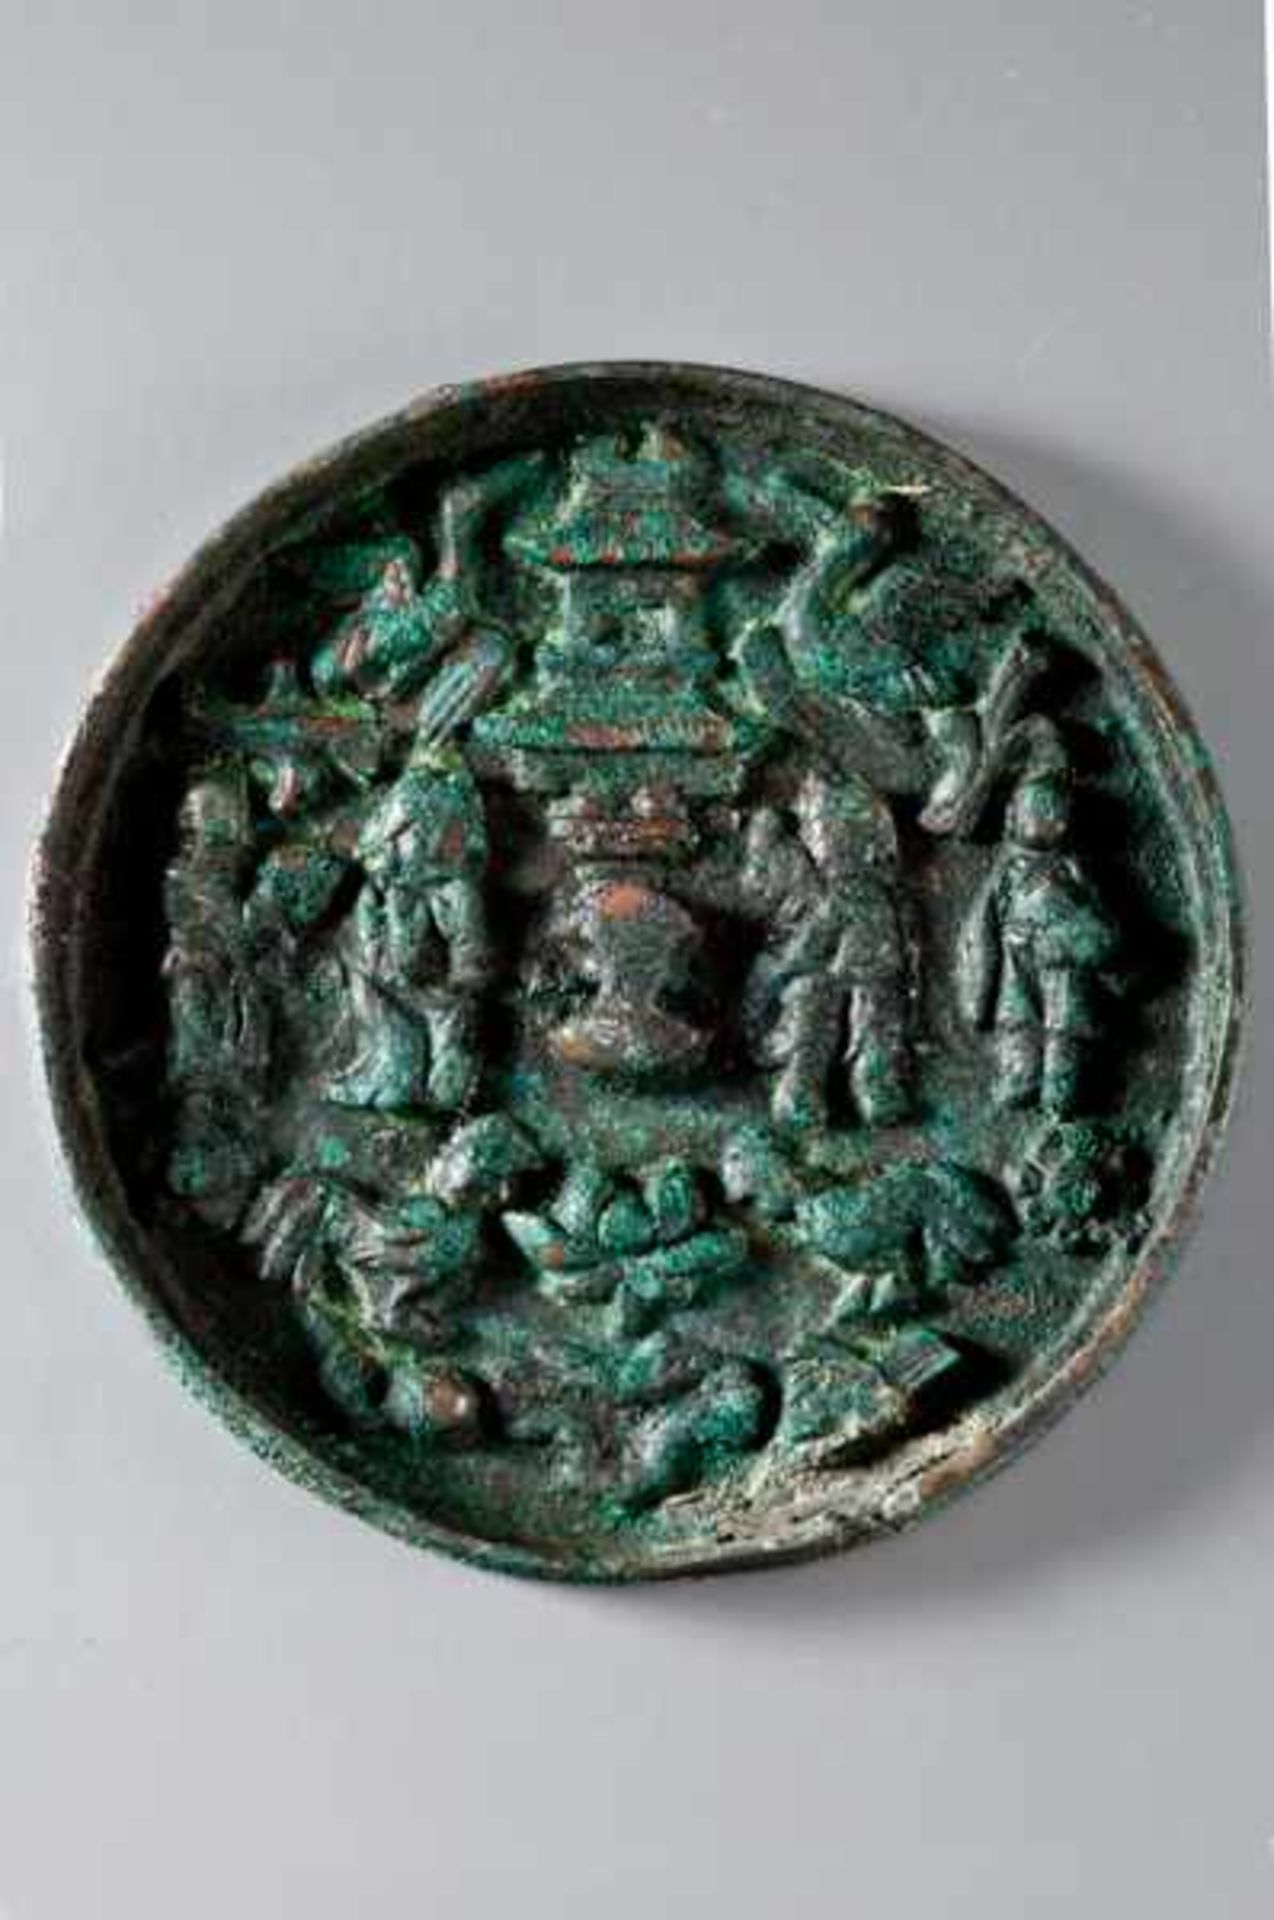 MIRROR WITH PAGODA, BIRDS AND FIGURES Bronze. China, in the style of Yuan-dynastyCircular form, bowl